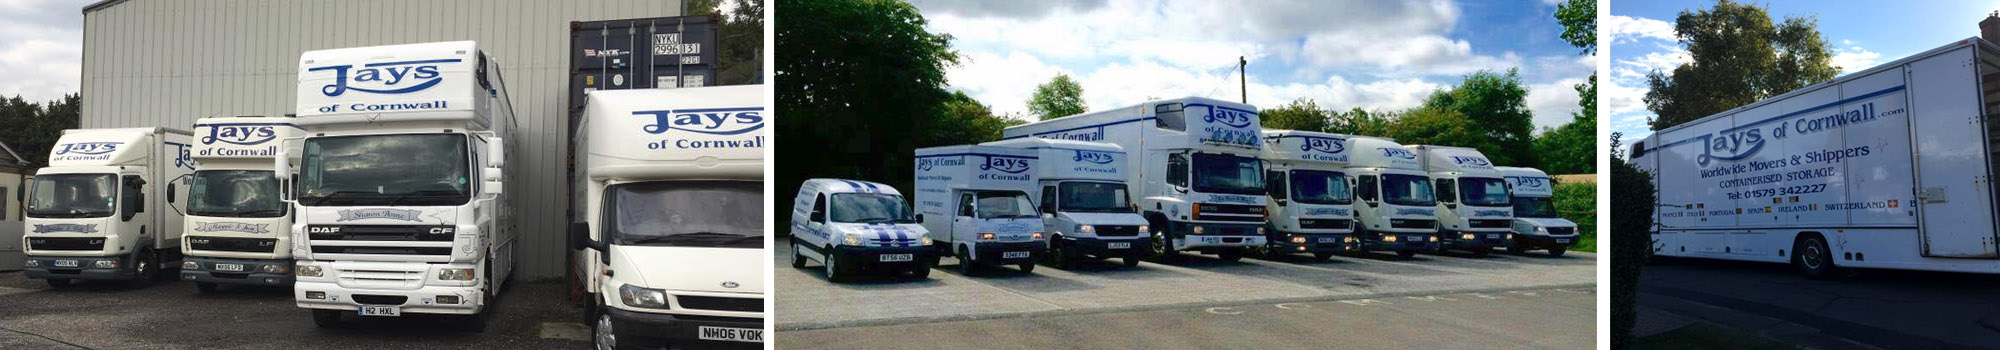 Removals In Cornwall